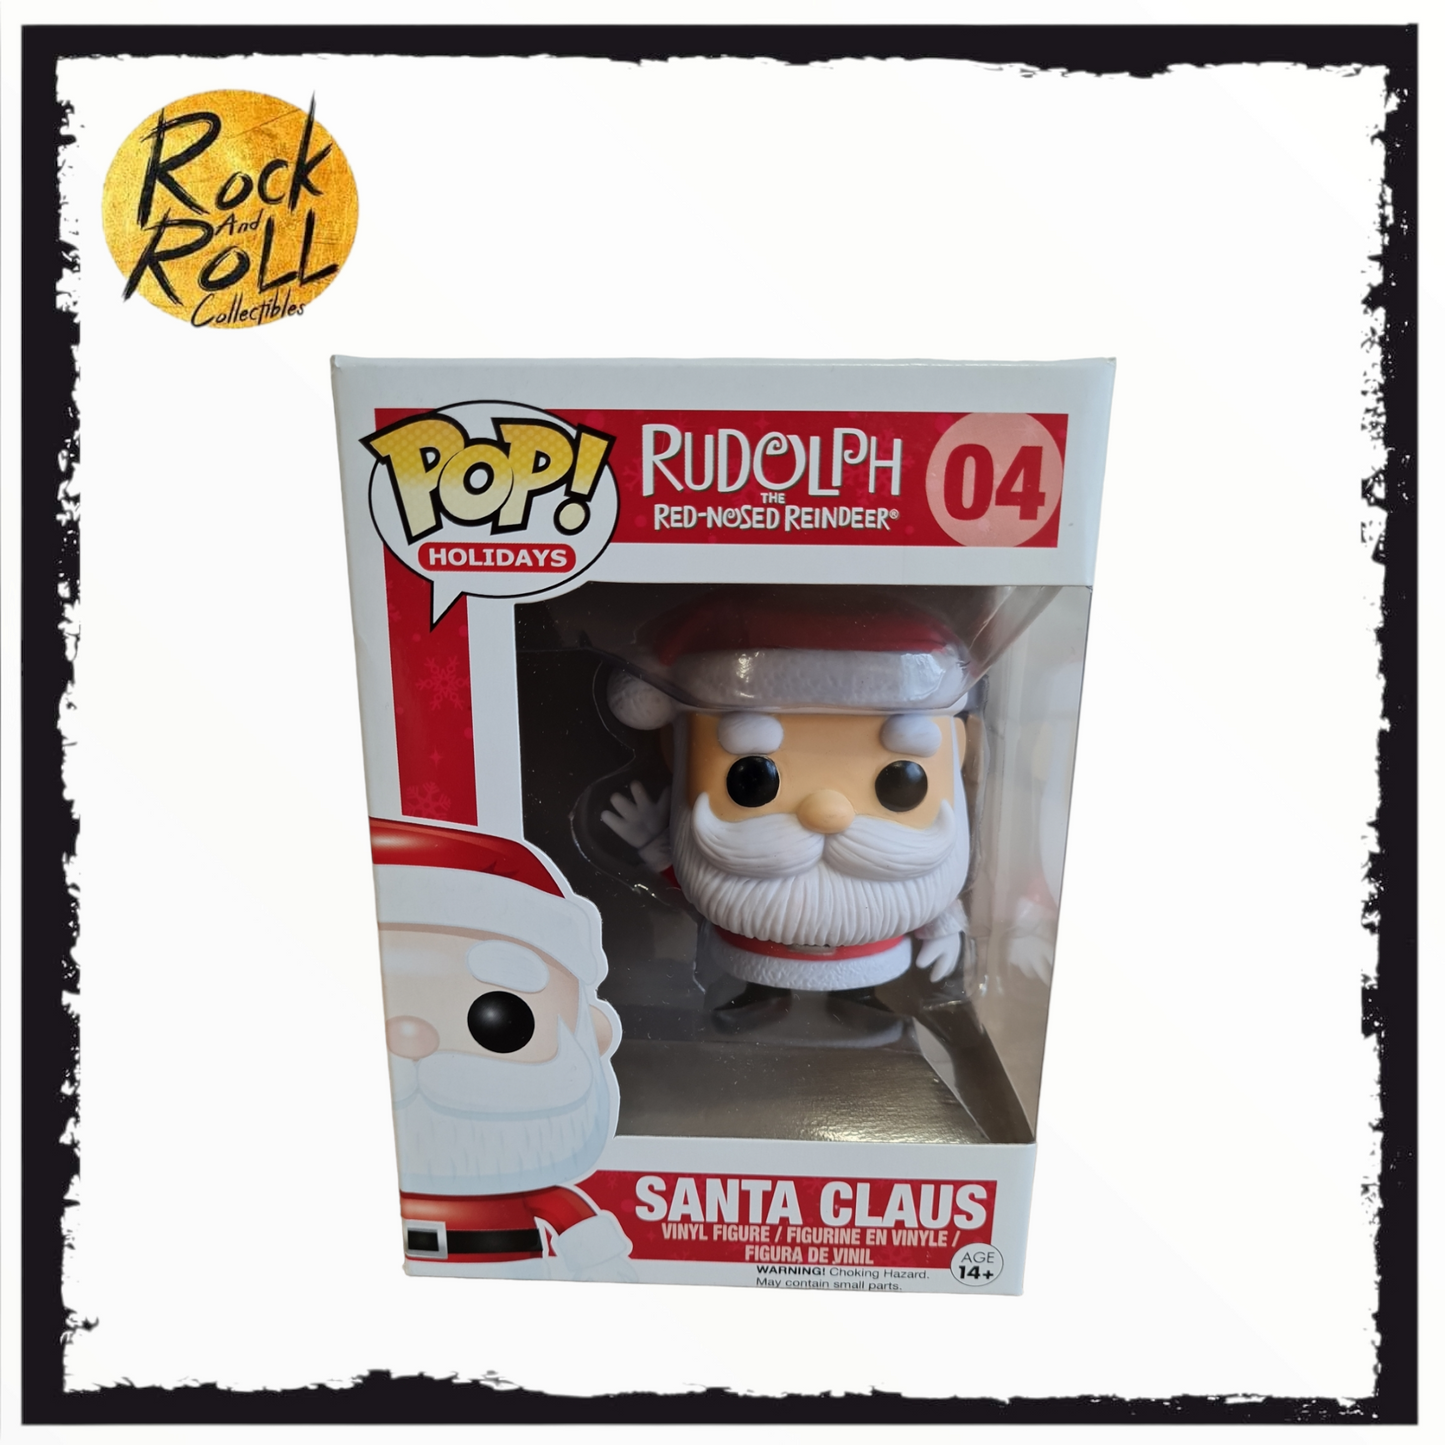 Rudolph The Red-Nosed Reindeer - Santa Claus Funko Pop! #04 Condition 7/10